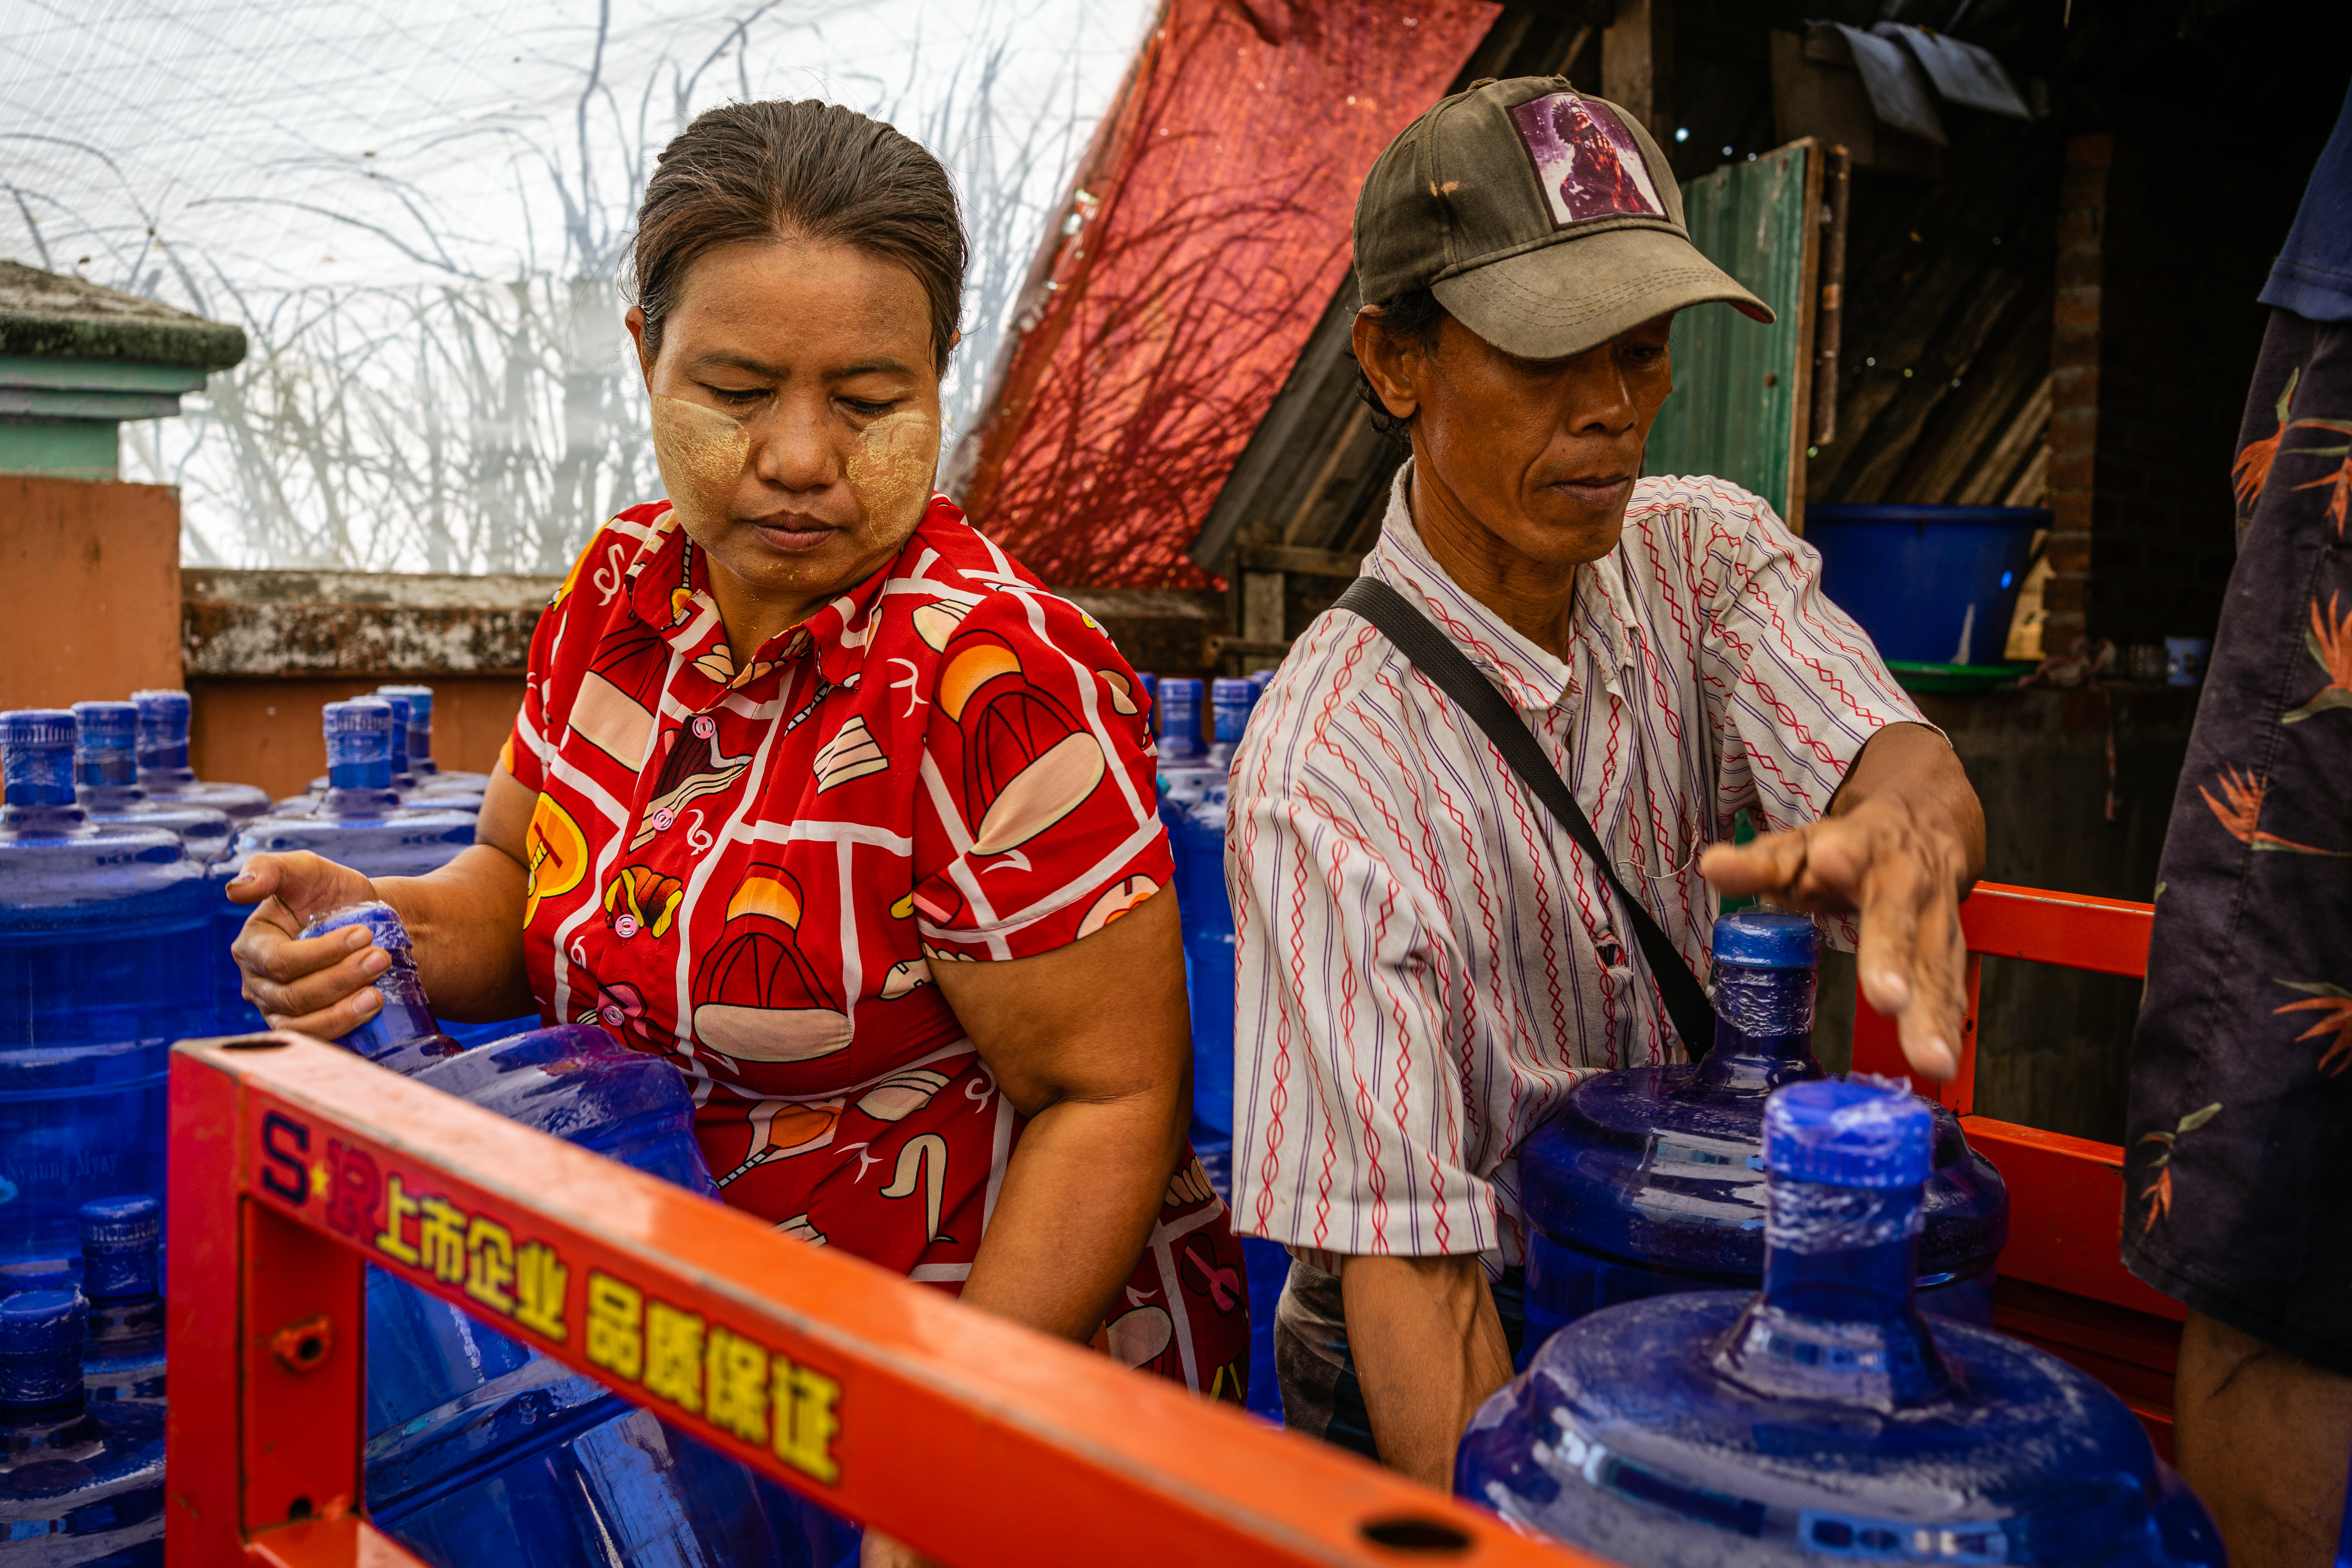 Rather than truck in water, UNDP and WaterAid workers are supporting people to create micro-enterprises to distribute water to people, in low-income areas in Yangon